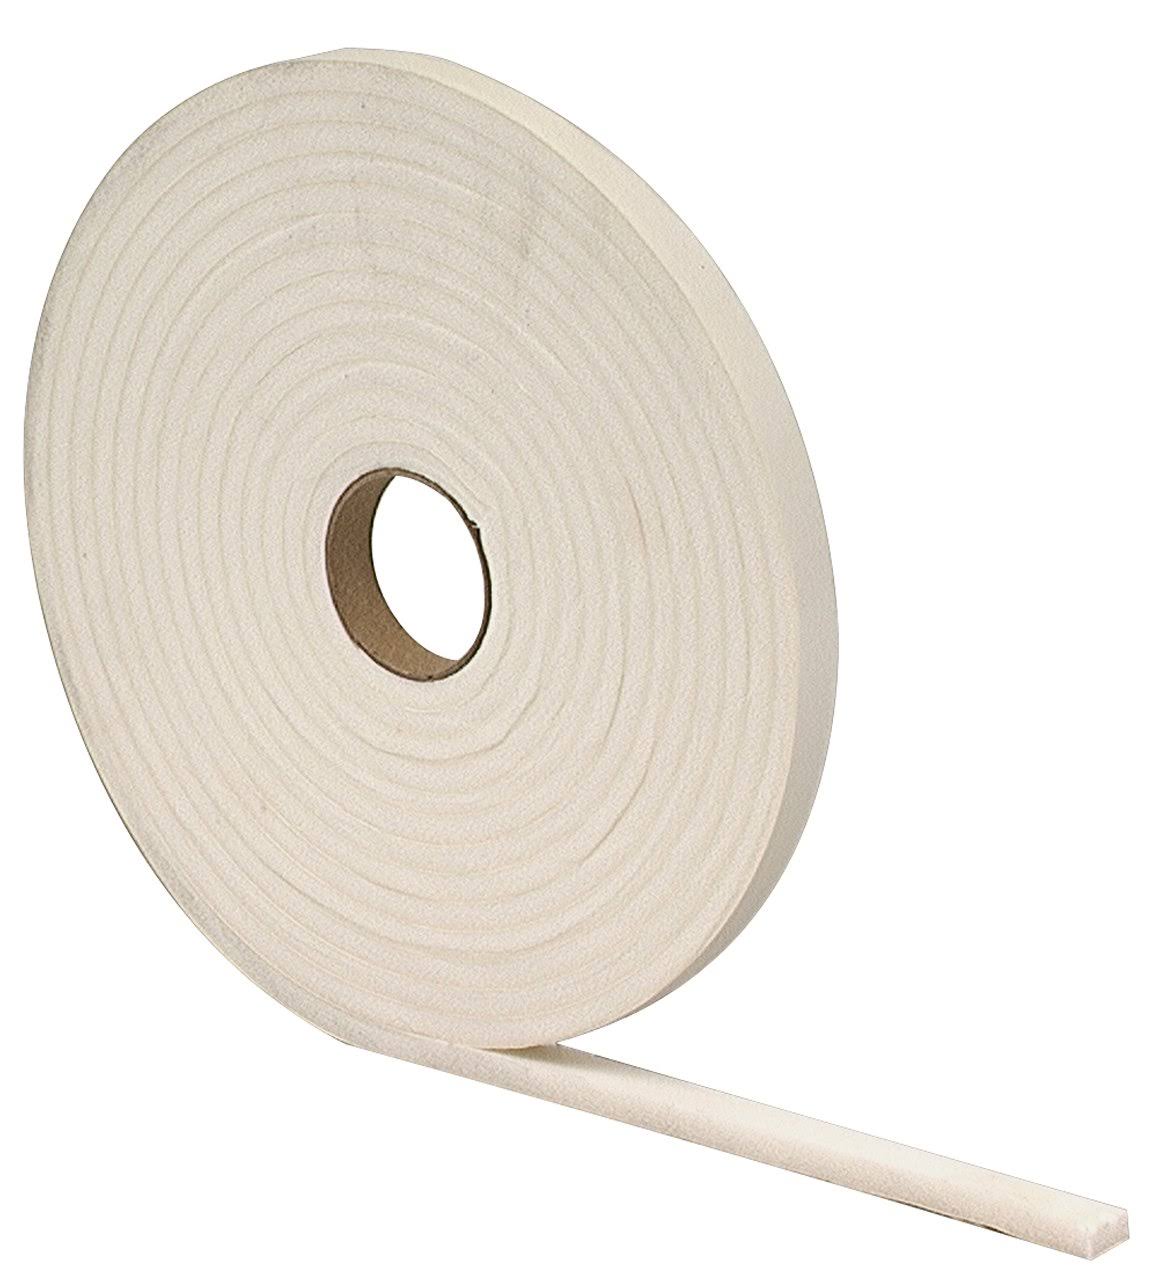 M-D Building Products High Density Foam Tape - Closed Cell, White, 1/4" x 1/2" x 17'